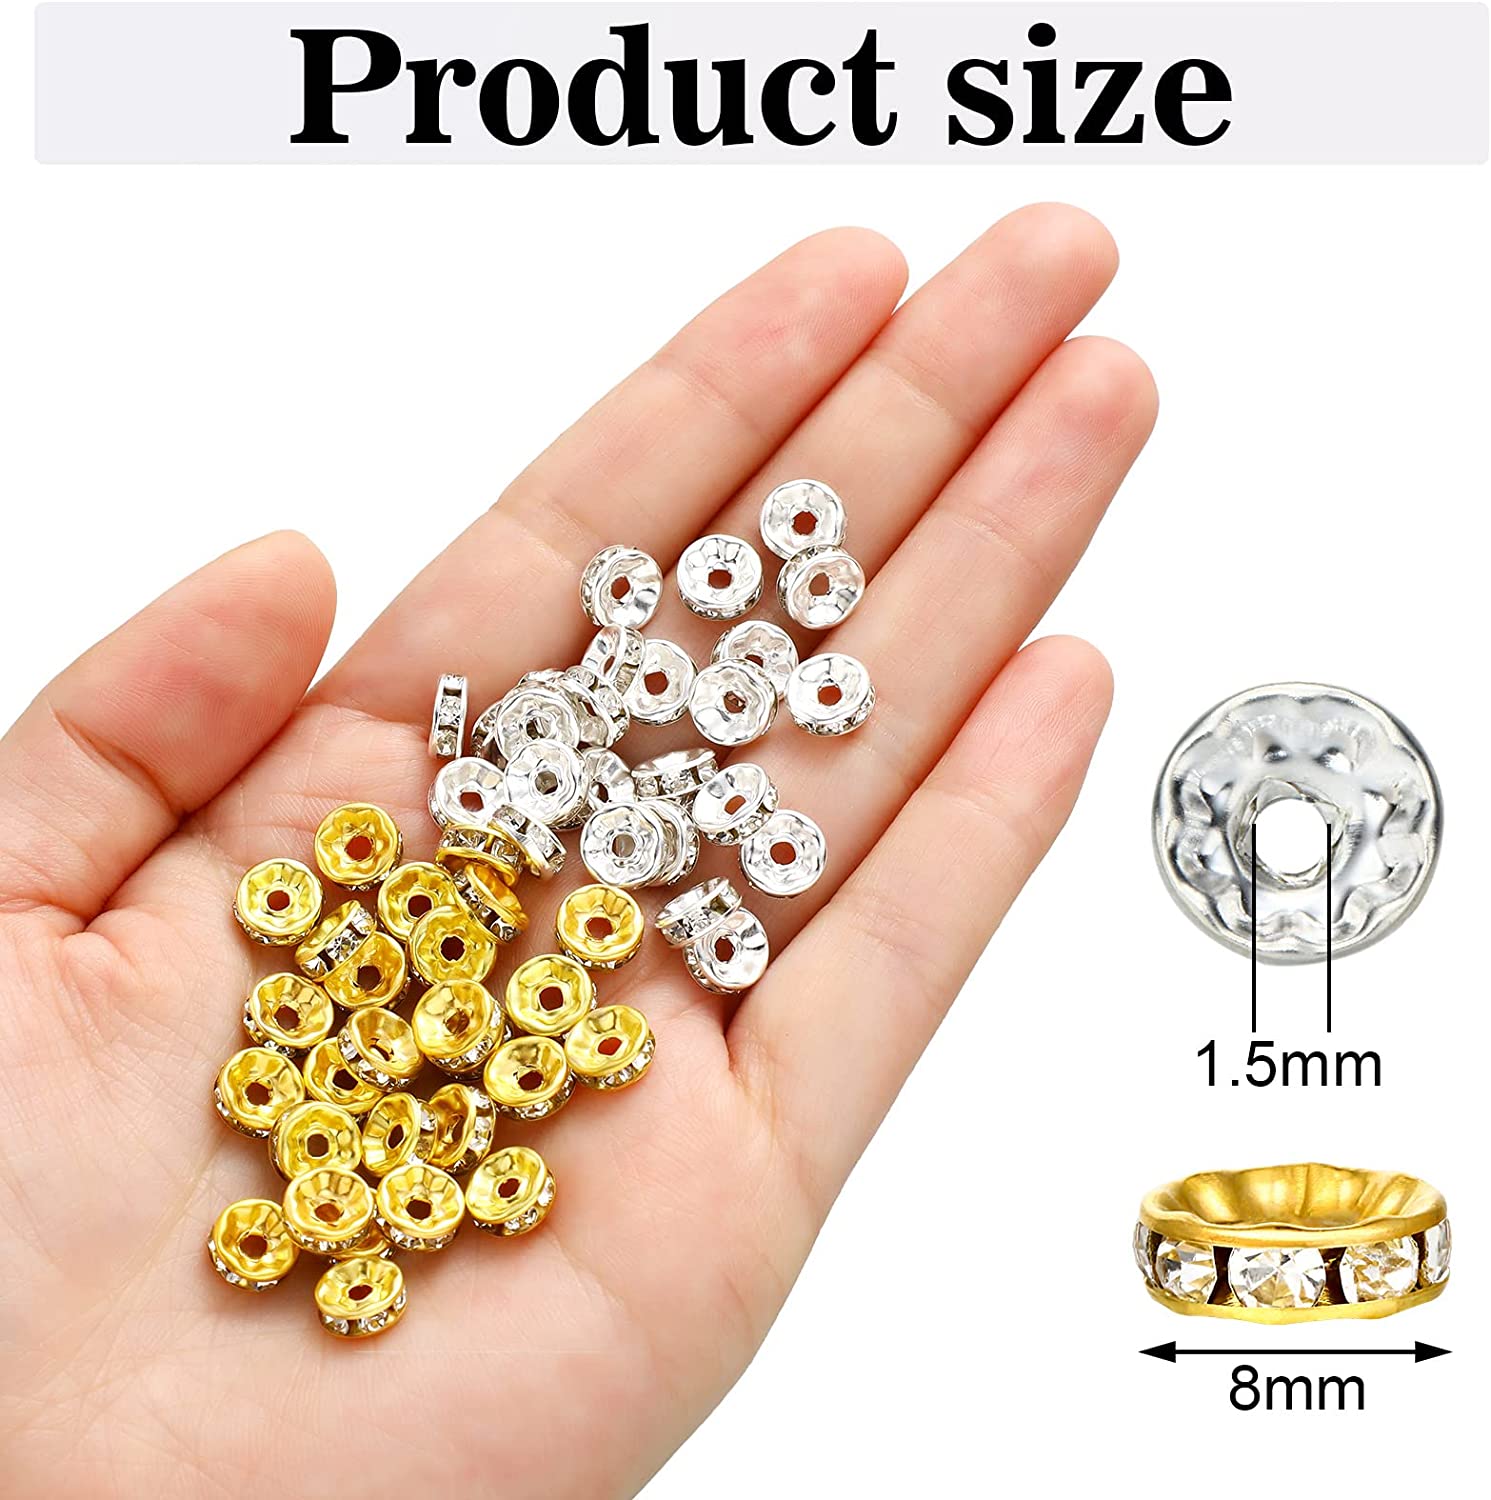 800 Pieces 8mm Round Rondelle Spacer Beads Crystal Rhinestone Loose Bead  Charm Beads Spacer Bead for Jewelry Making (Gold, Silver,8 mm)